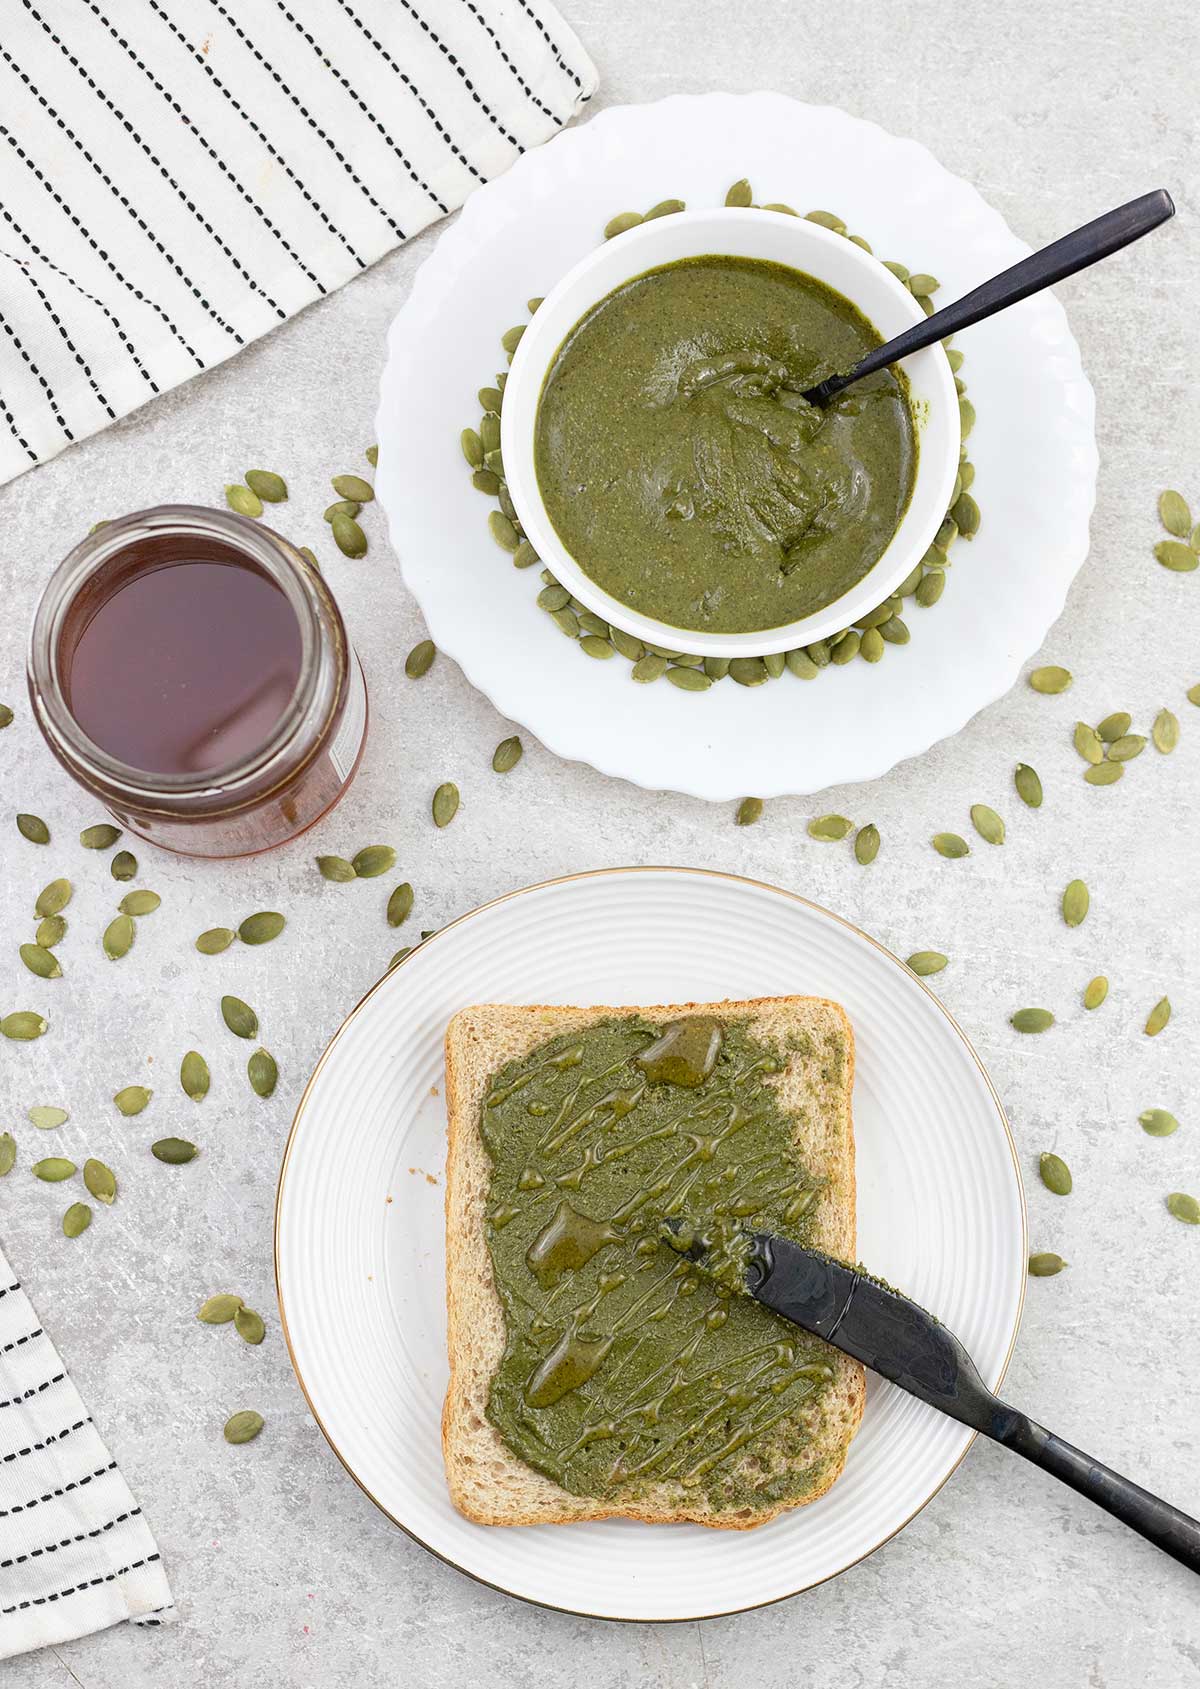 Pumpkin seed butter on toast and a glass of honey and a bowl full of pumpkin seed butter.